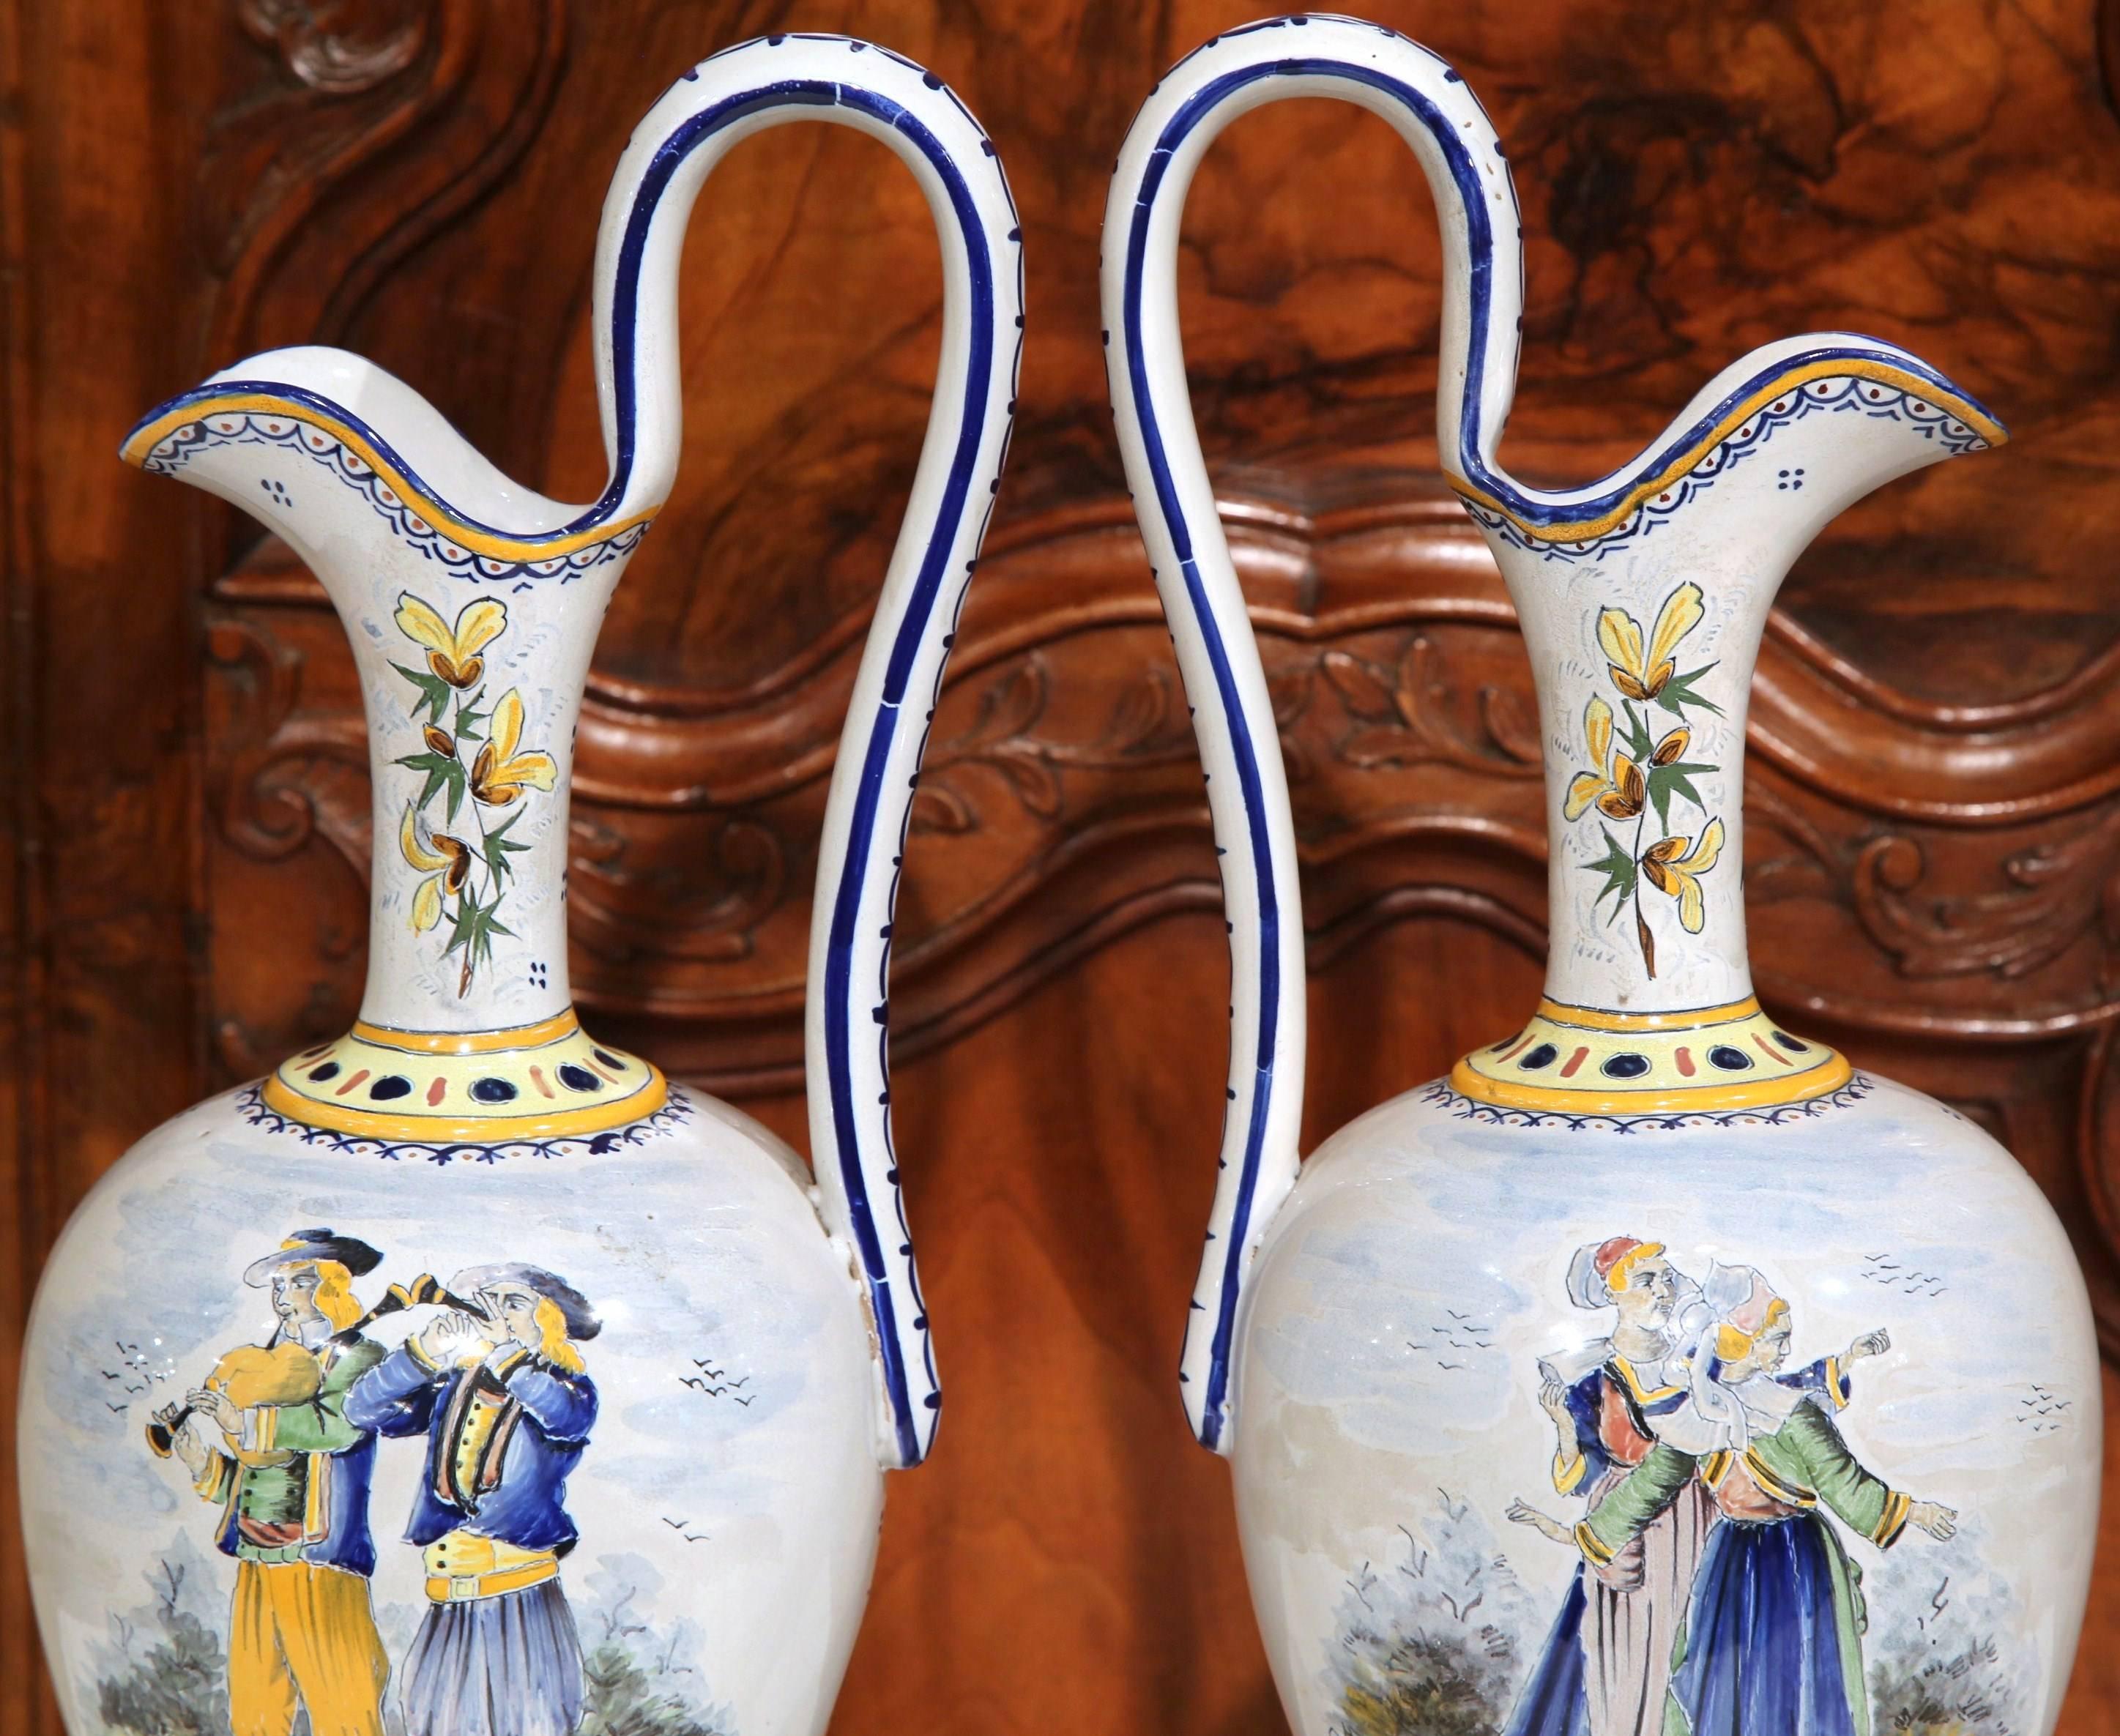 Ceramic Pair of Early 20th Century French Hand-Painted Water Pitchers from Quimper